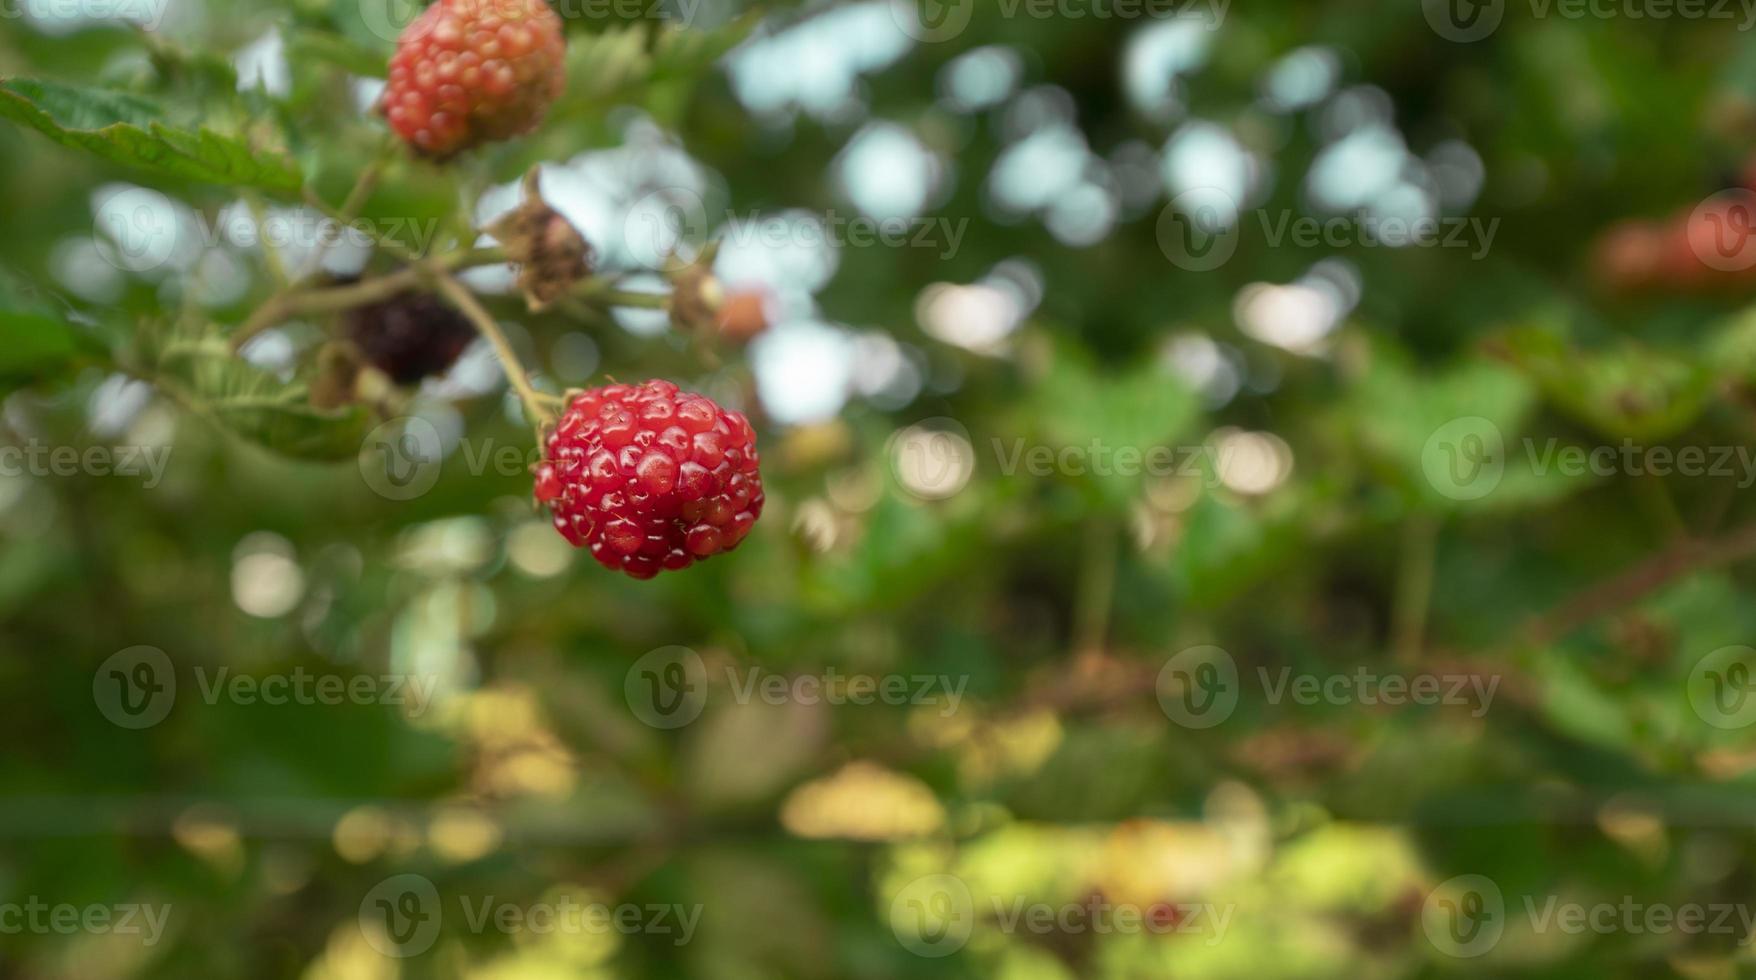 Red and ripe blackberry fruits hanging from the plant in the foreground against background of defocused leaves on a sunny day photo